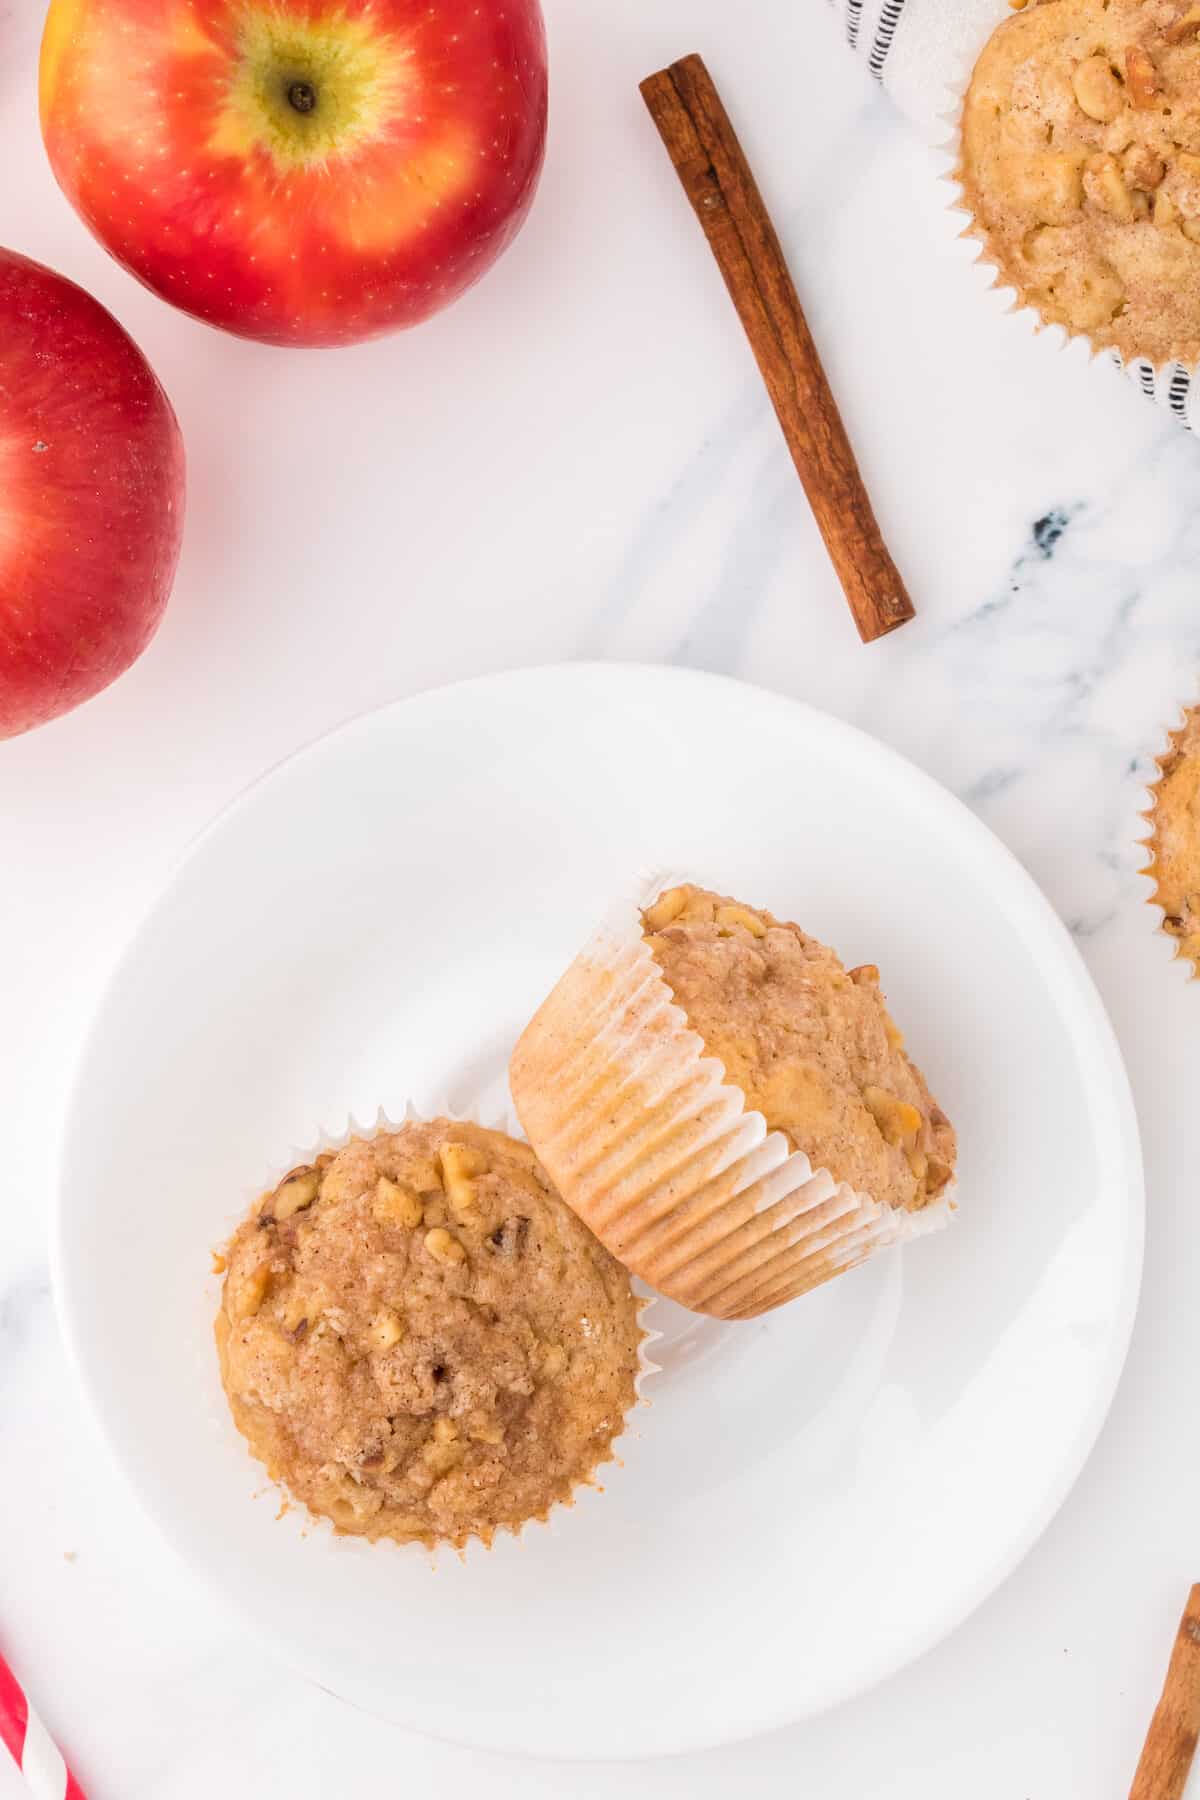 two apple crumb muffins side by side on a white plate with fresh apples in background.